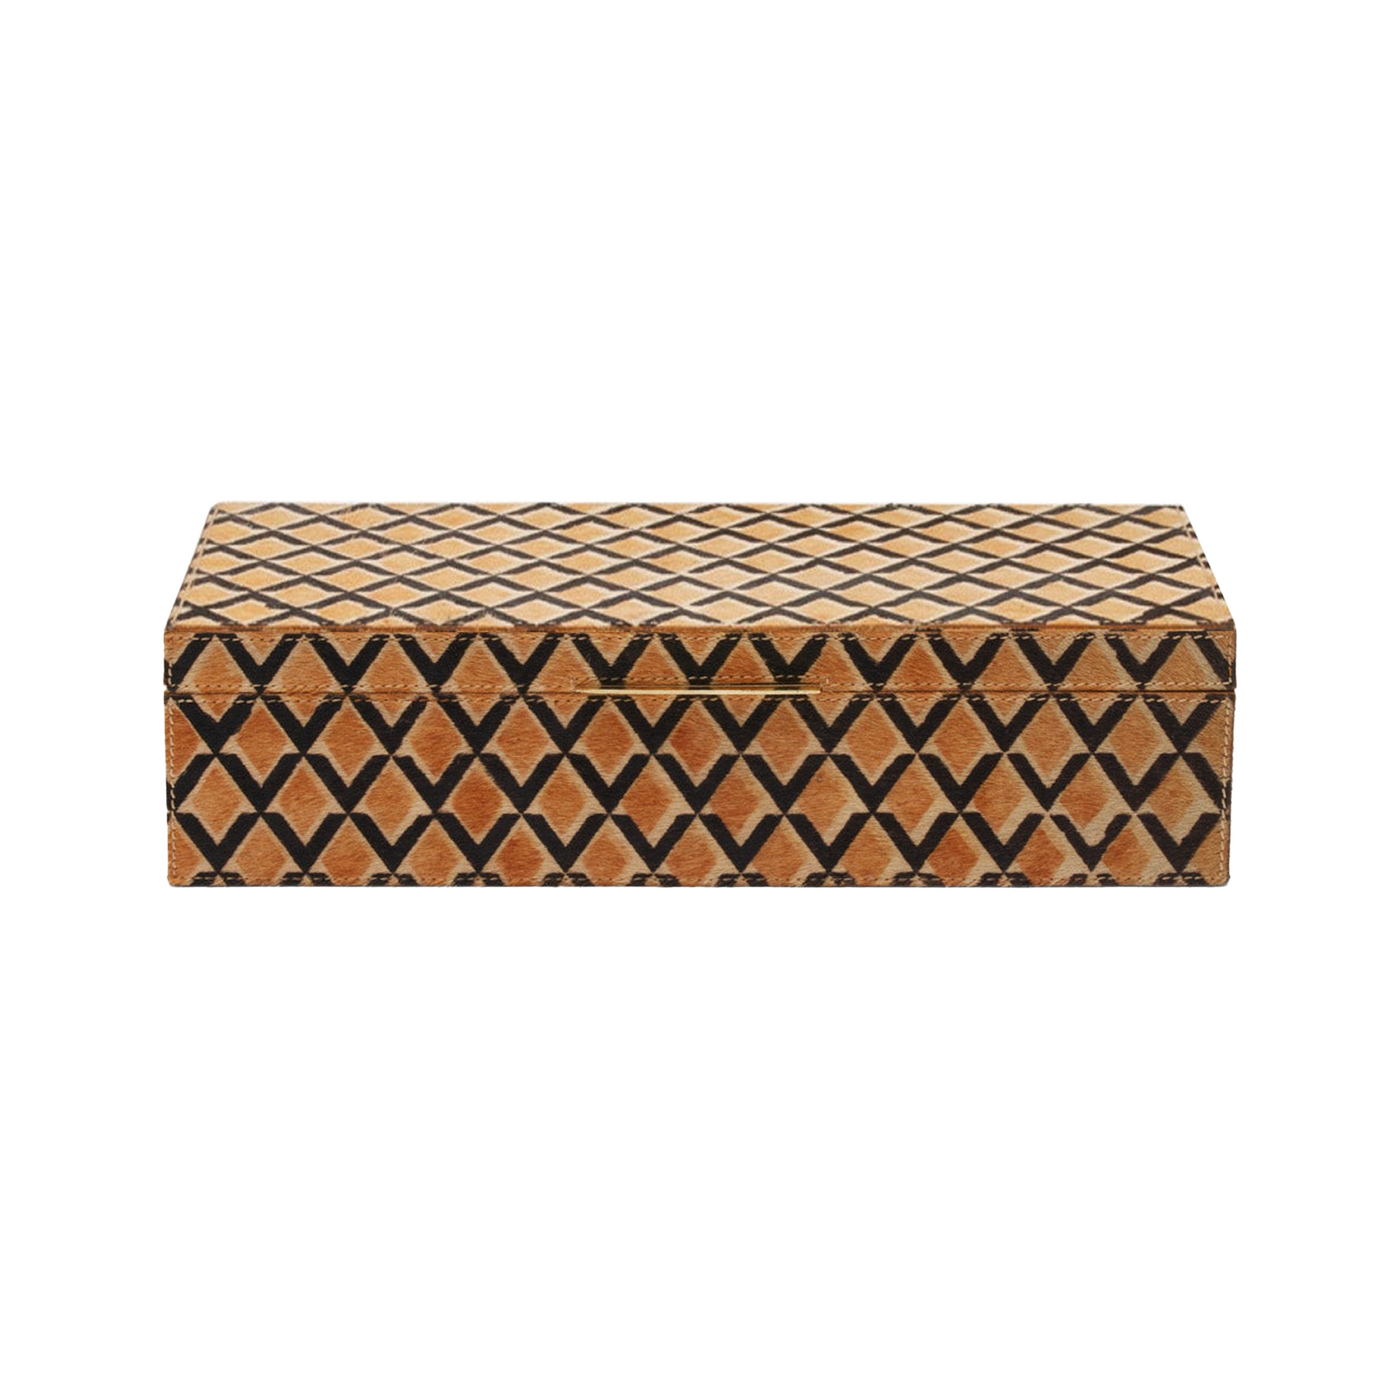 Zion Box - Large (Orange and Black Hair on Hide)